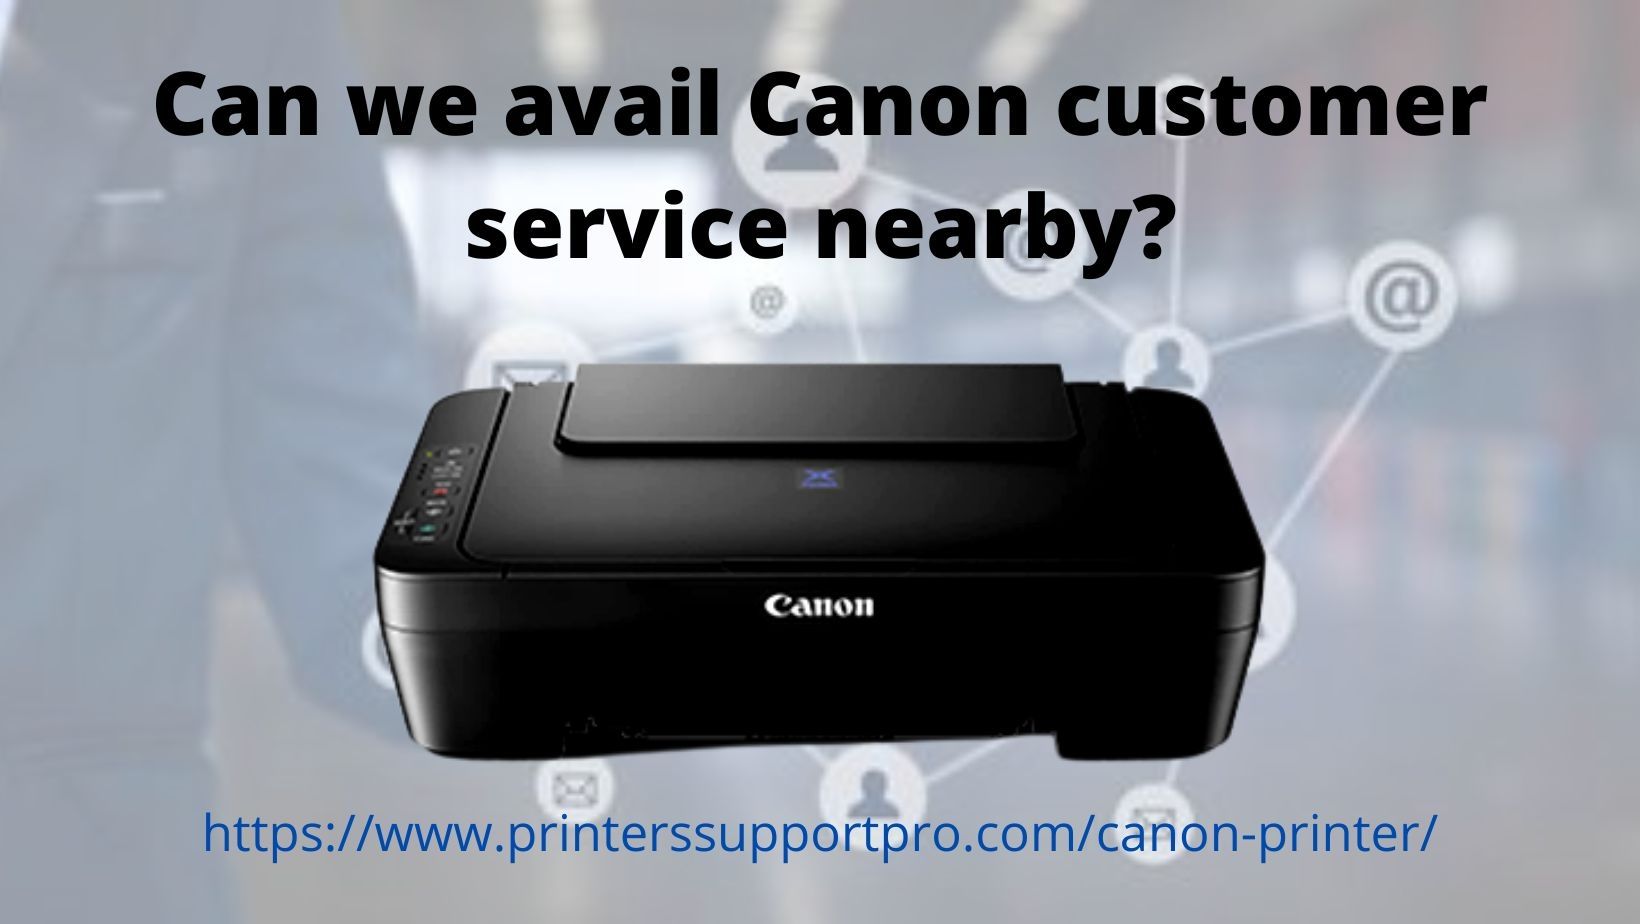 Can we avail Canon customer service nearby?